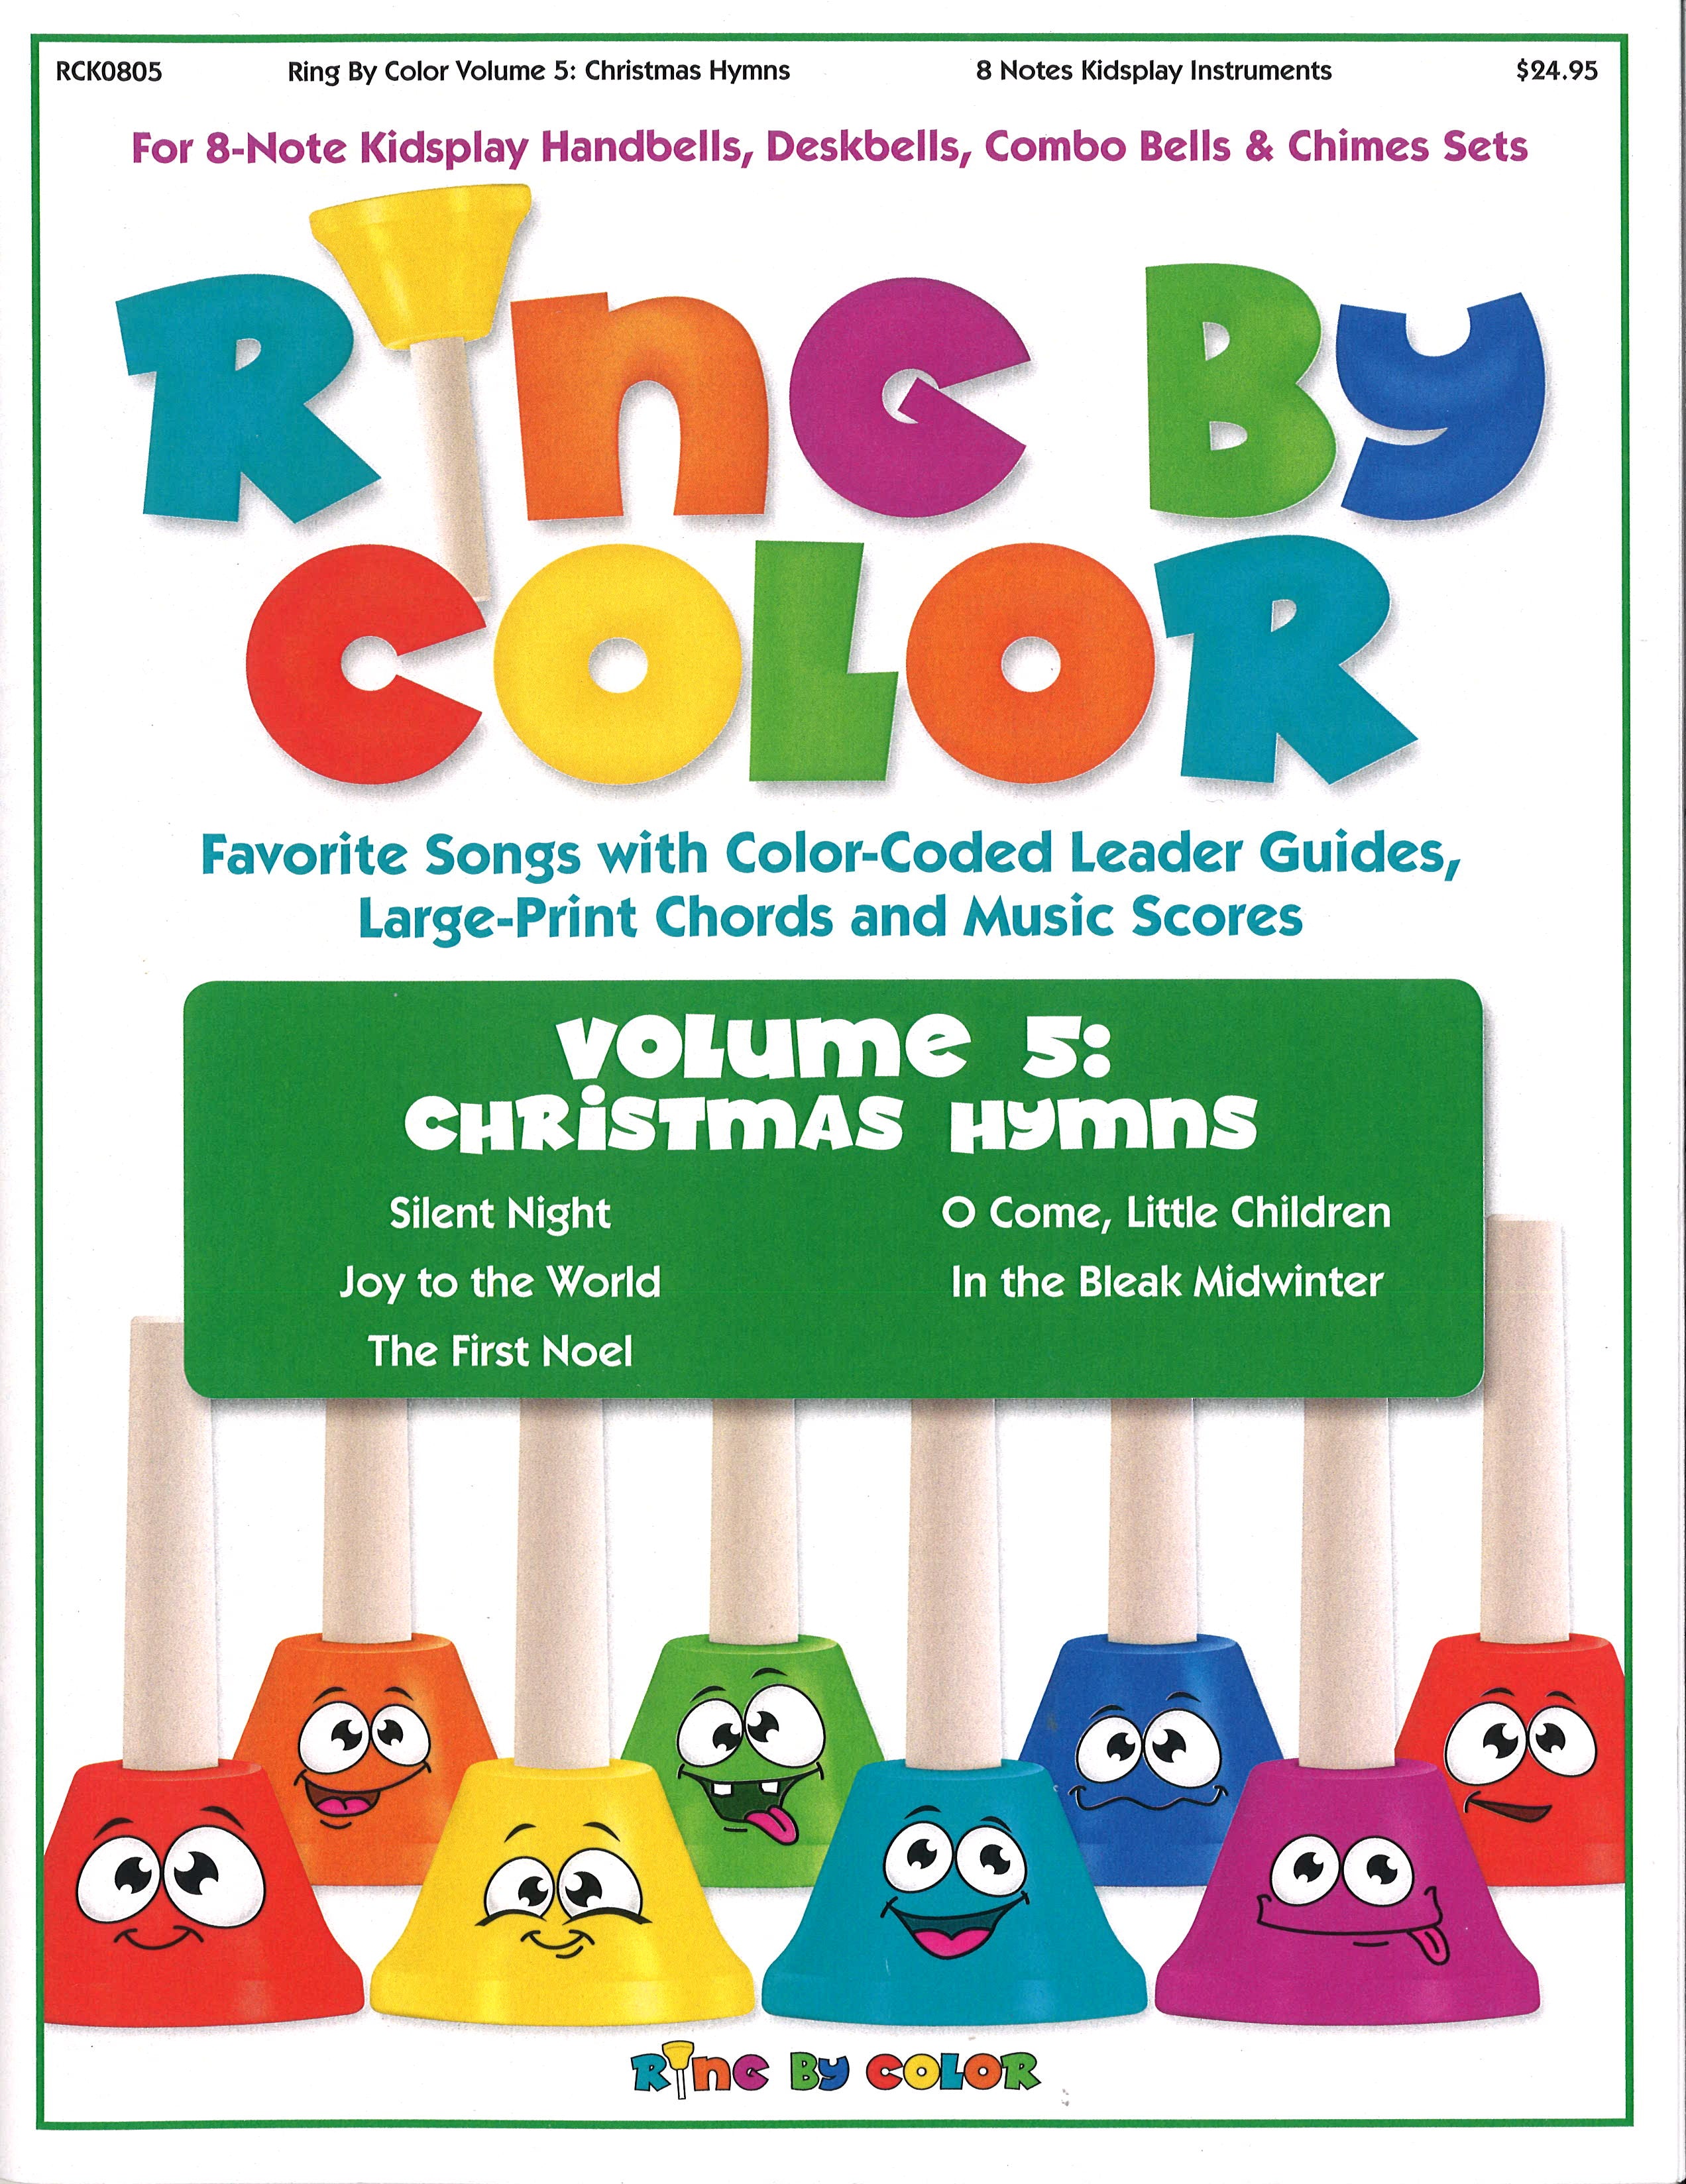 Ring By Color 8 Note Volume 5 Christmas Hymns